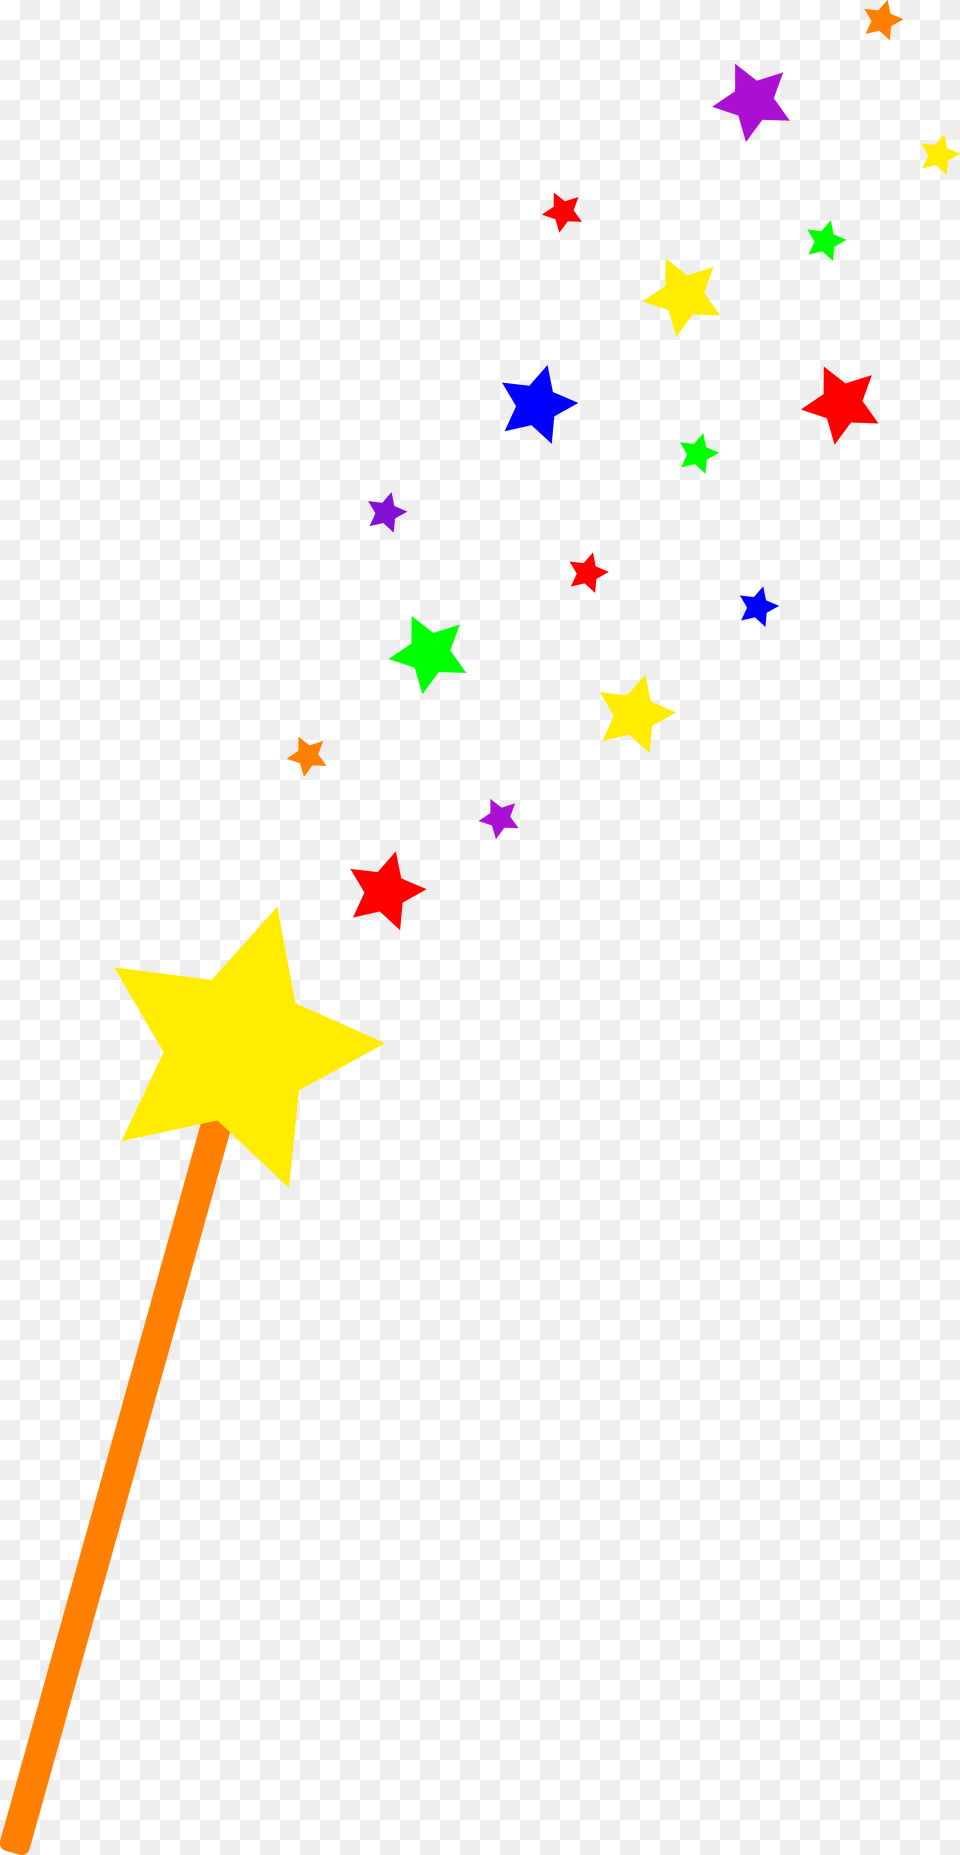 Starry Magic Wand Png Image